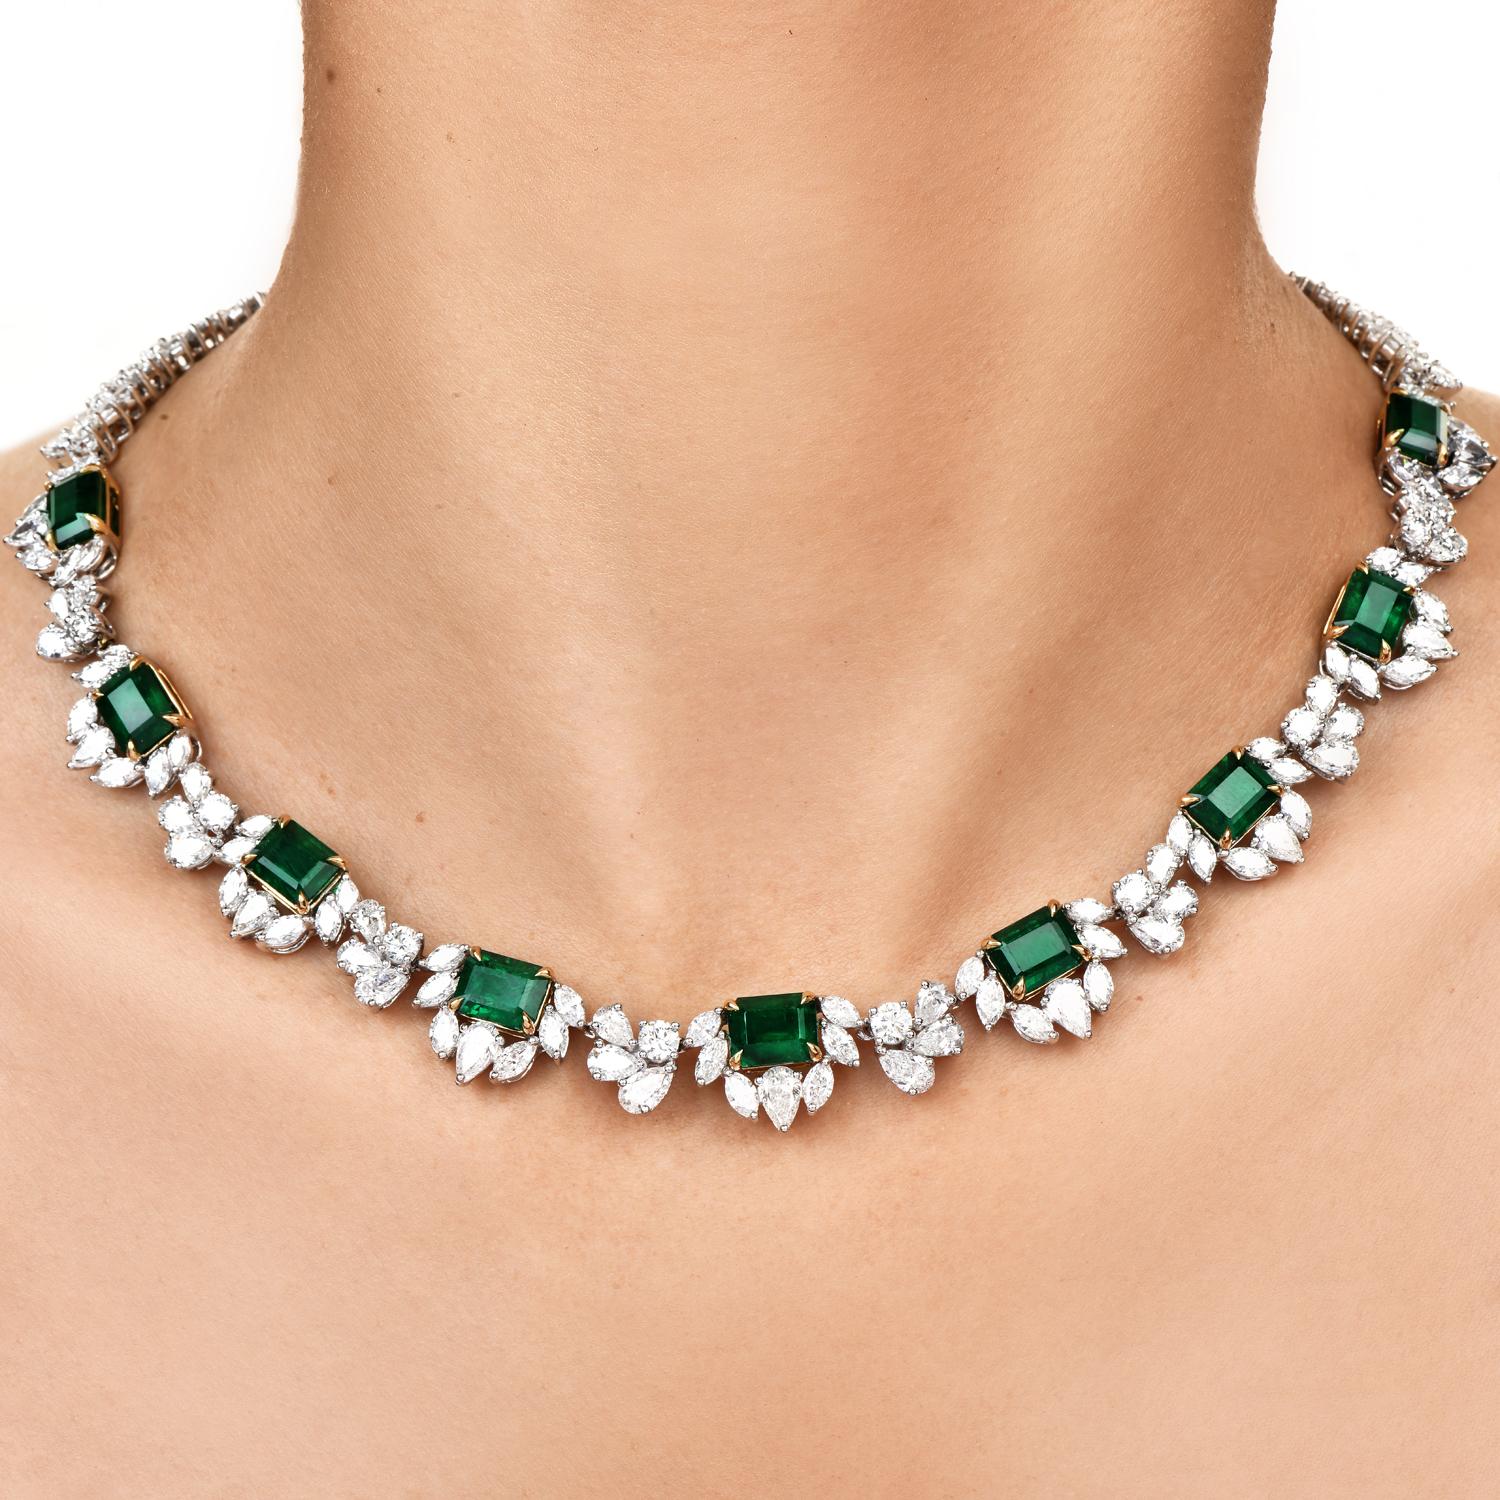 Vintage Diamond & Emerald floral-inspired link eternity necklace,

expertly crafted 18k White gold with yellow gold accents.

Bringing life into the piece are (9) vivid Green genuine fine natural Emerald gemstones, emerald cut, and prong set, 